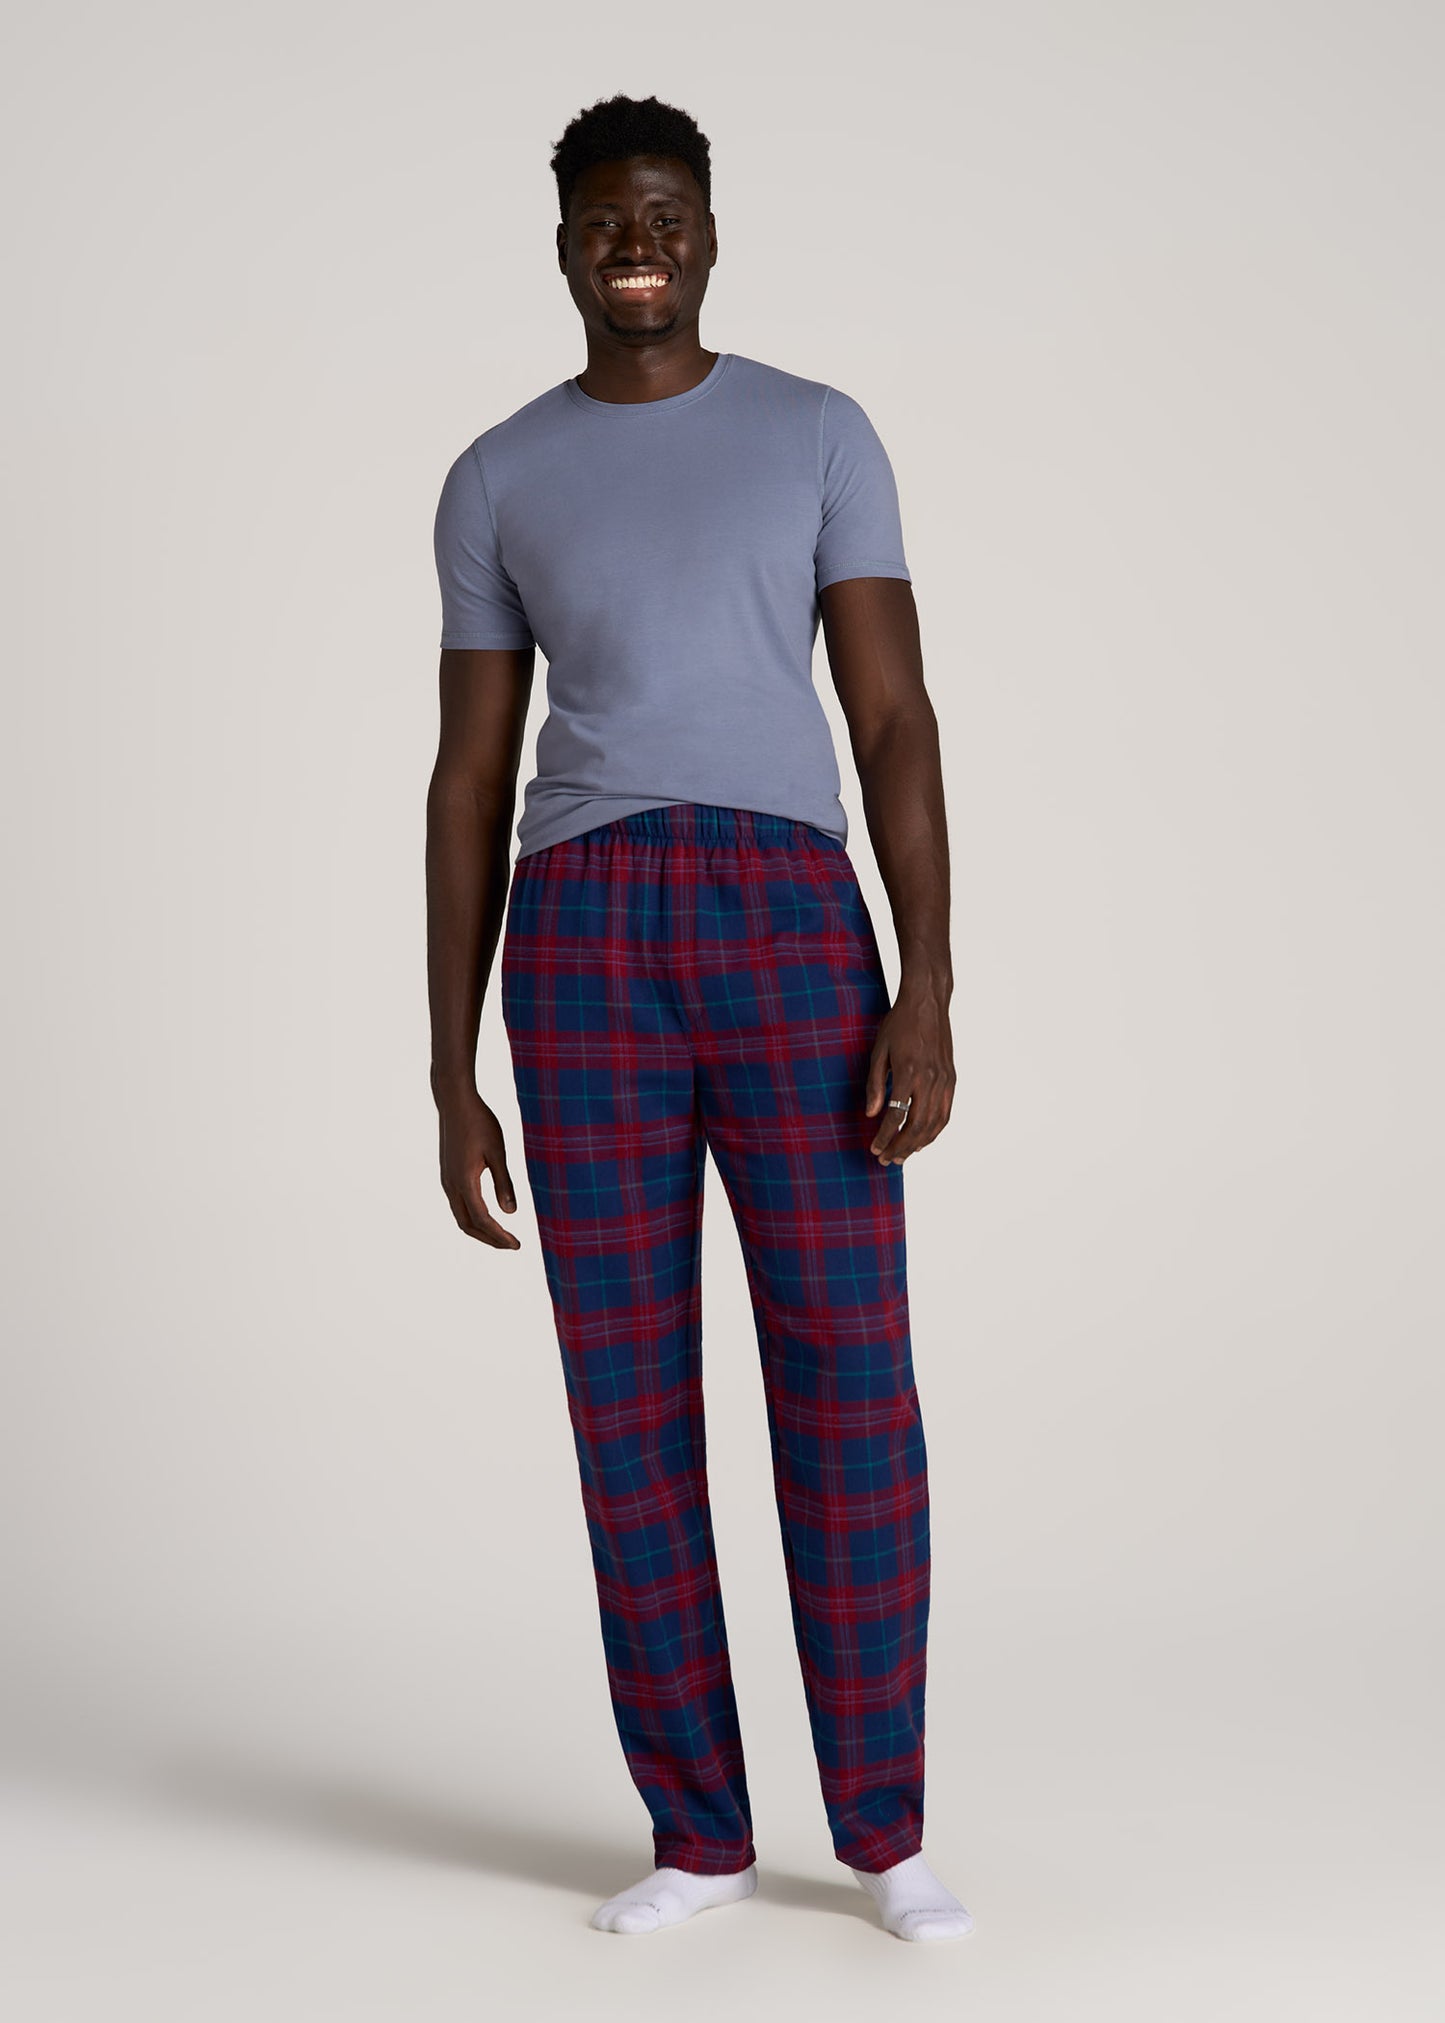 Plaid Pajama Pants for Tall Men in Blue and Red Tartan